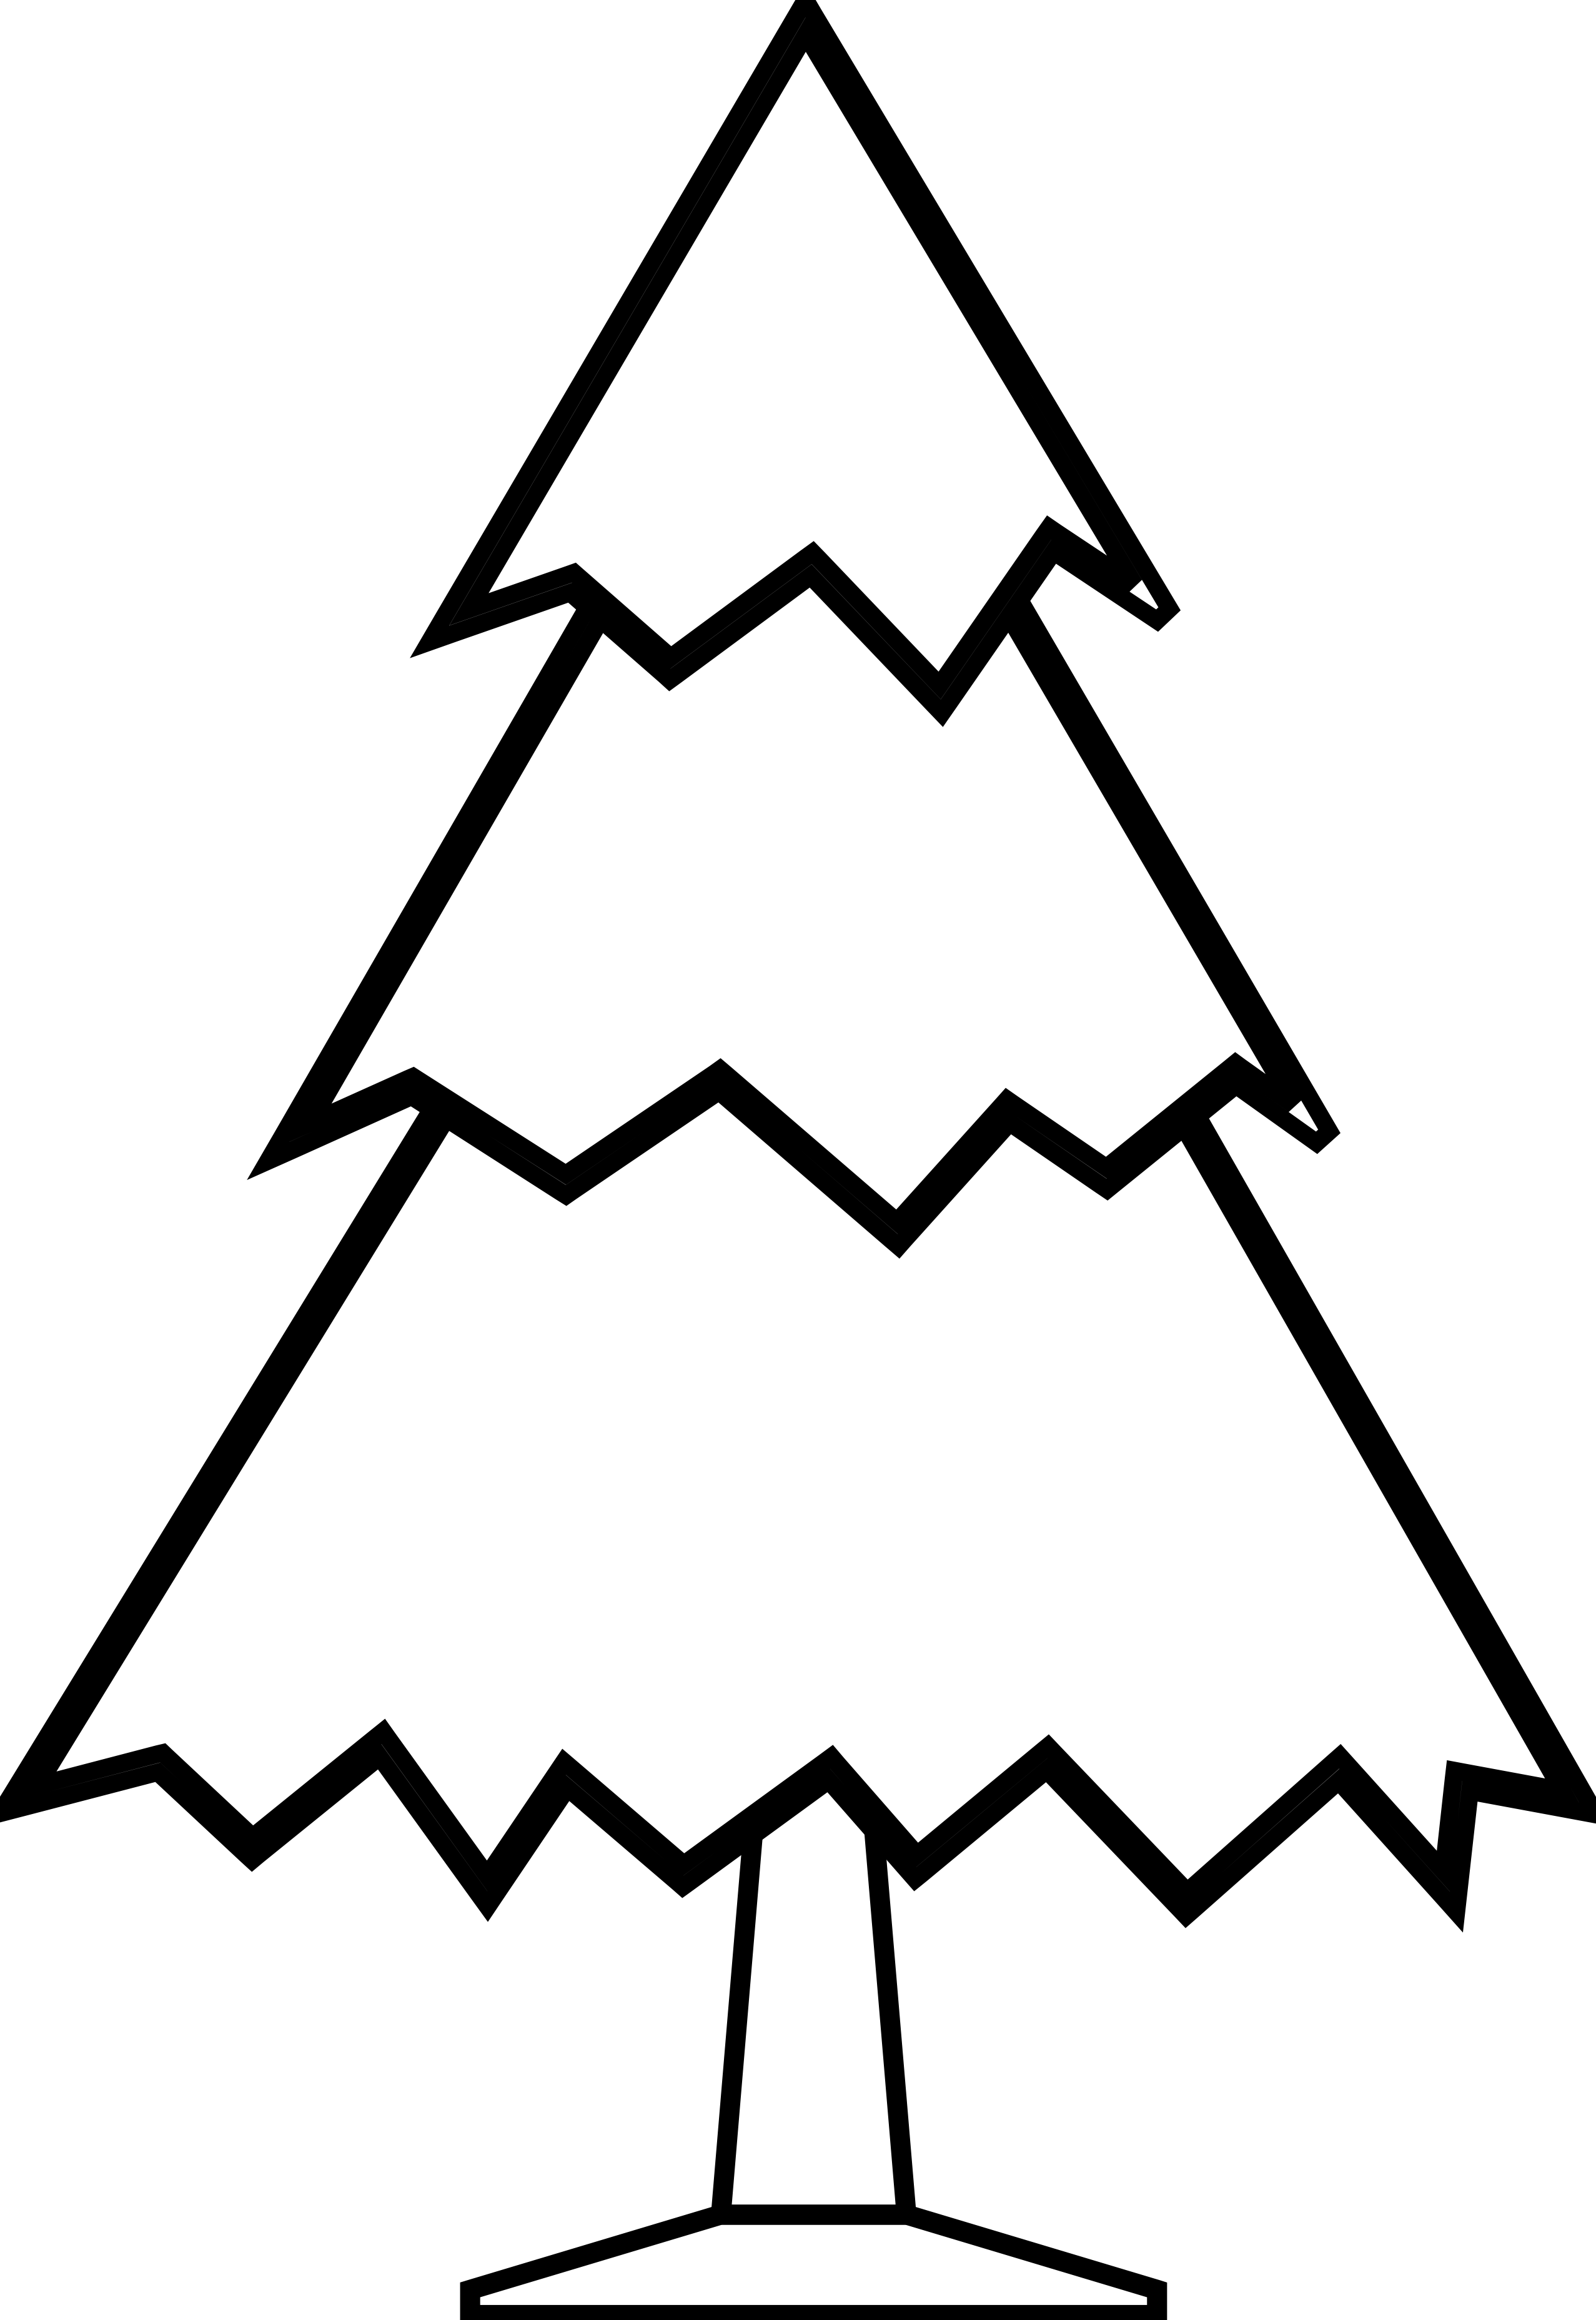 Free clipart line drawing tree